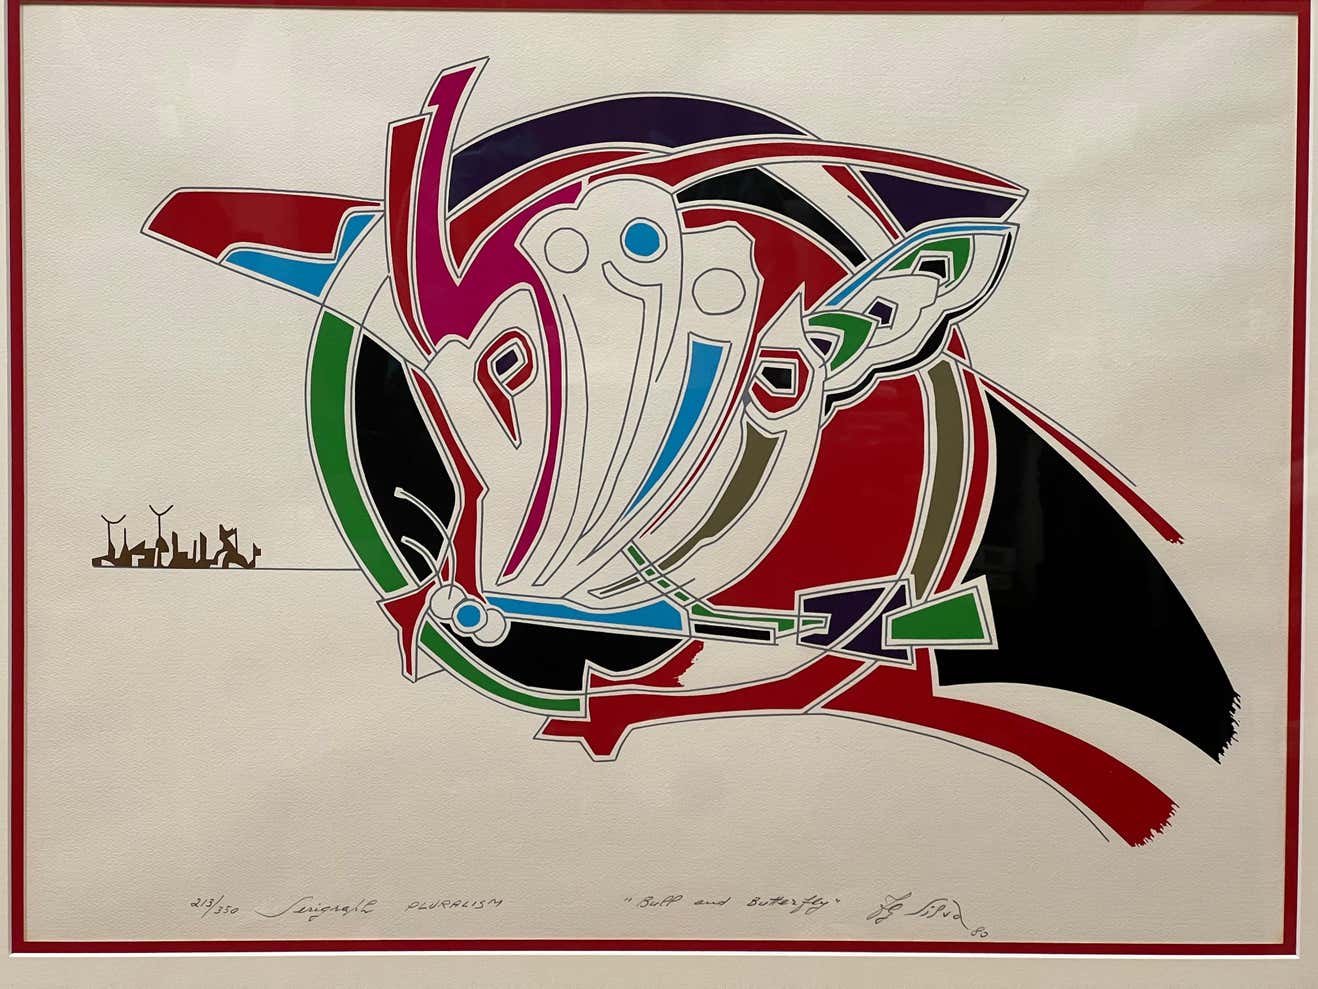 "Bull and Butterfly" Lithograph signed F.G.Silva